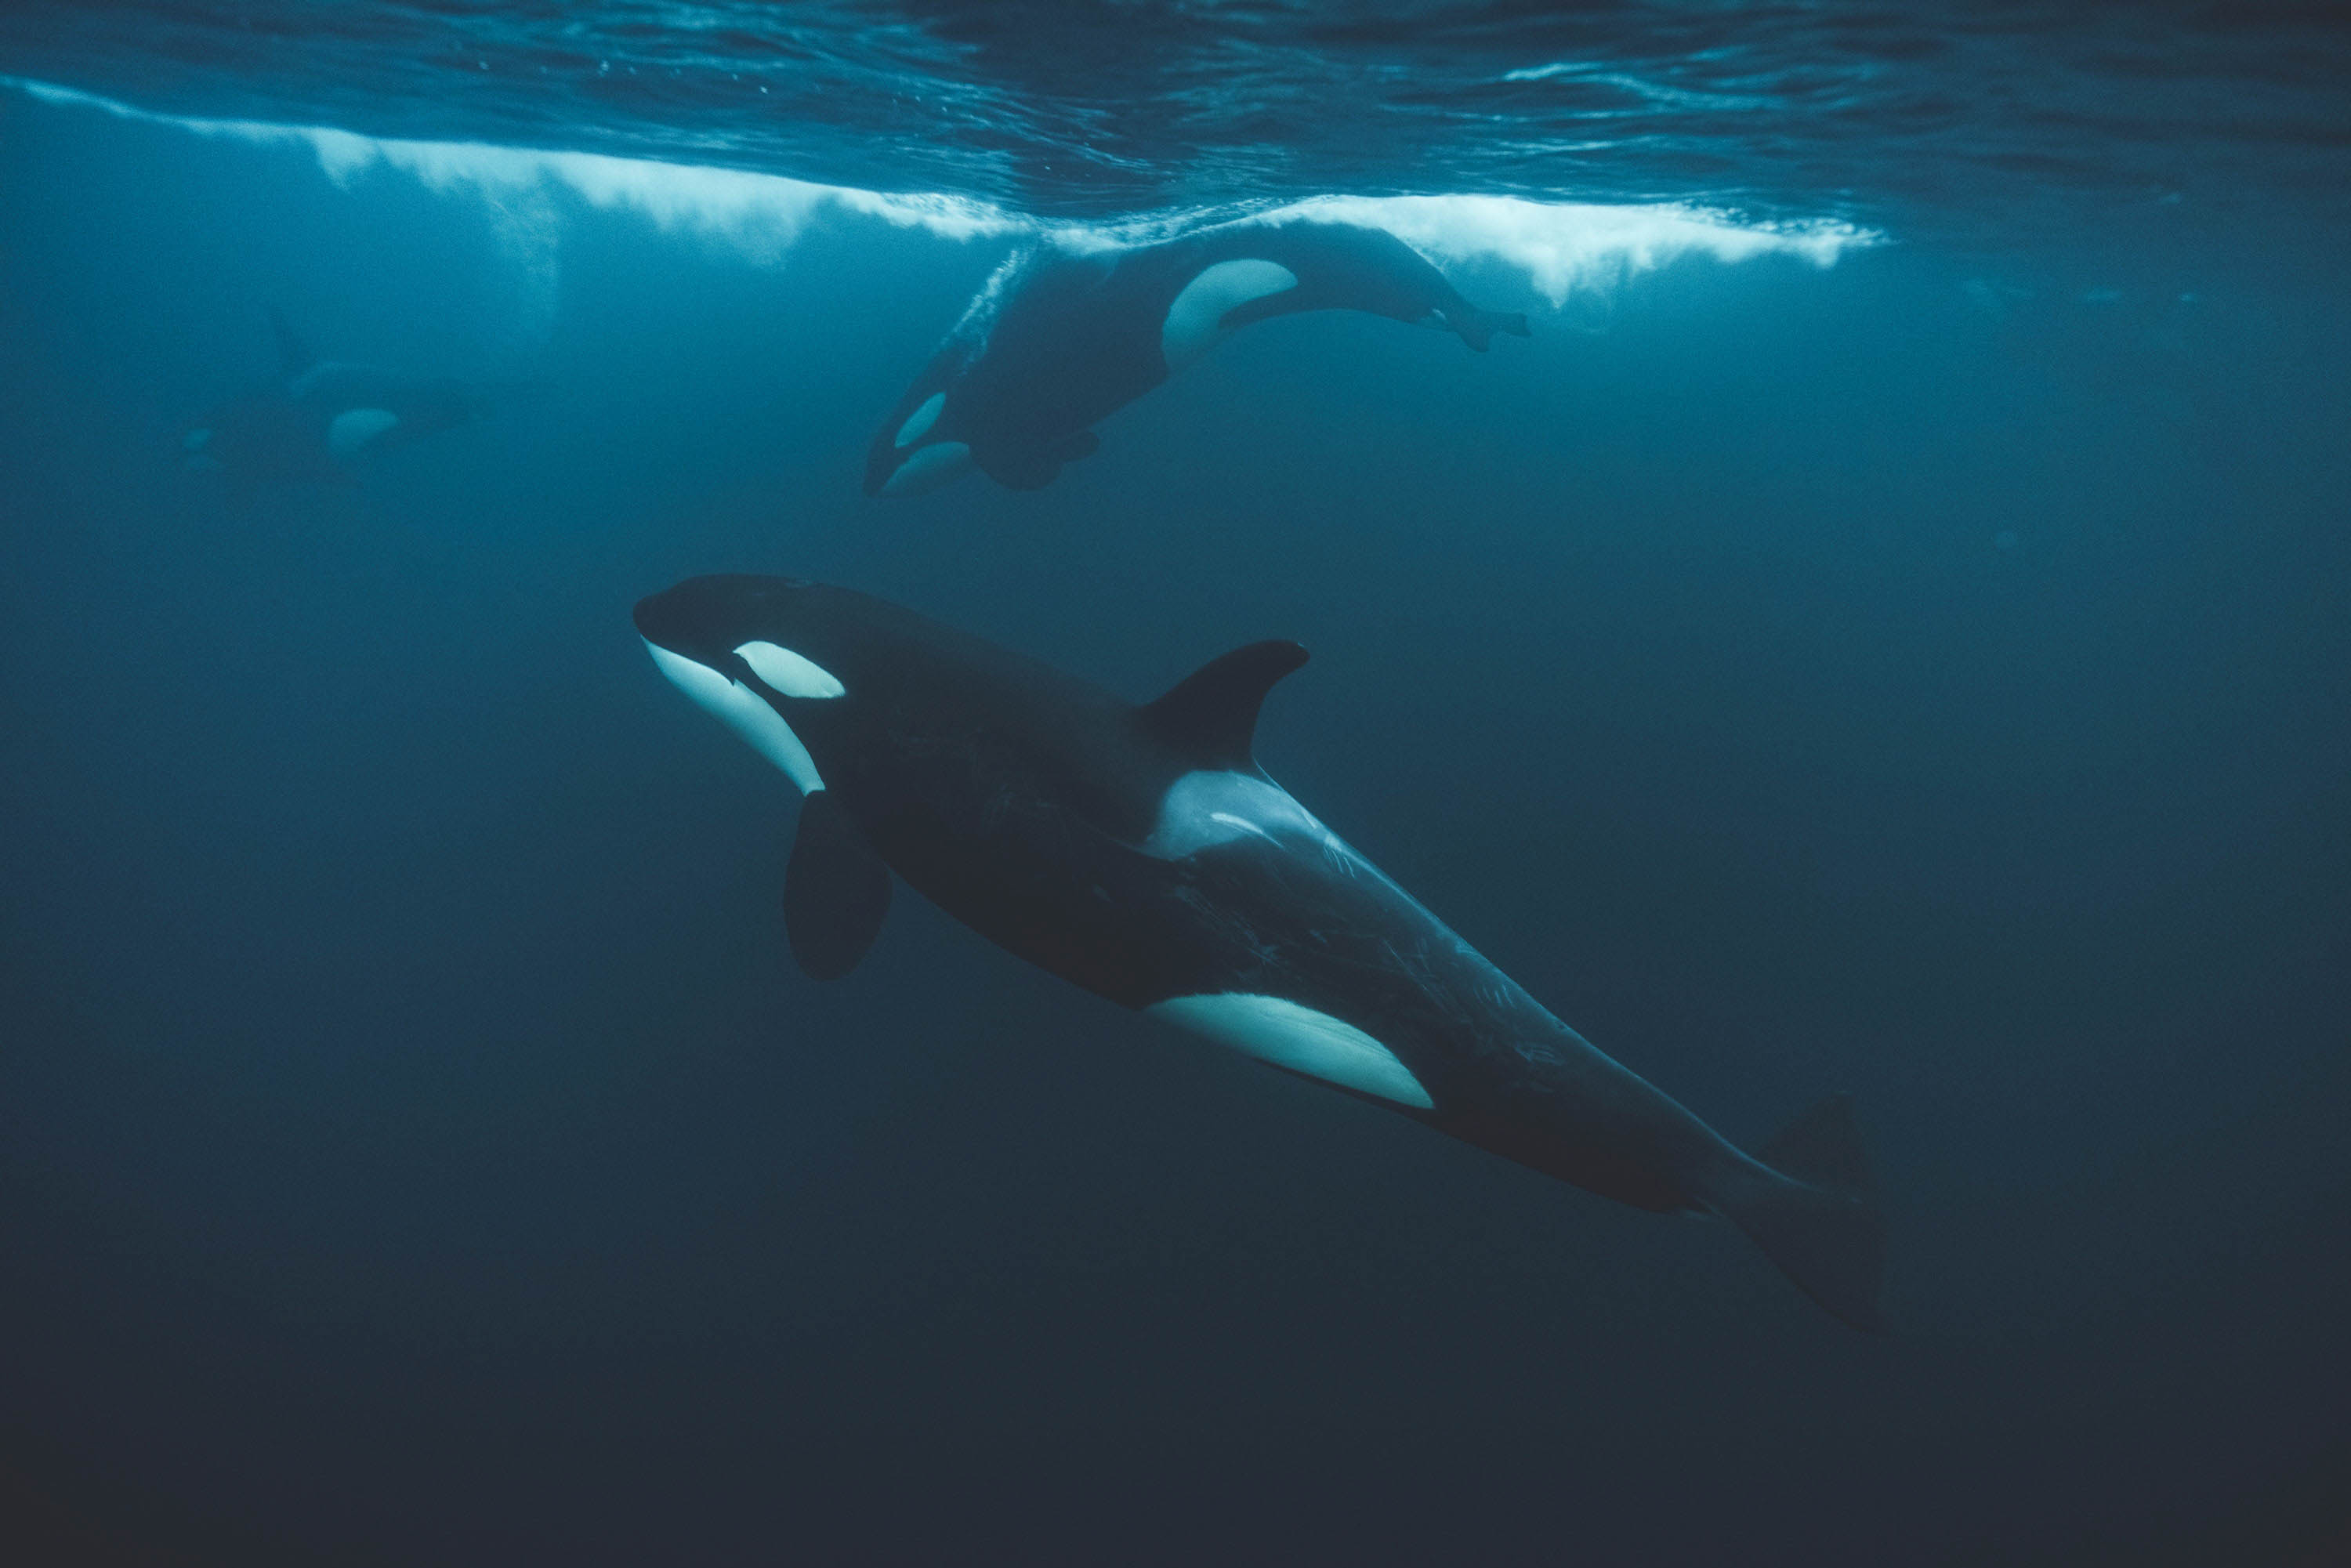 Orca, whales, killer whale, underwater photography